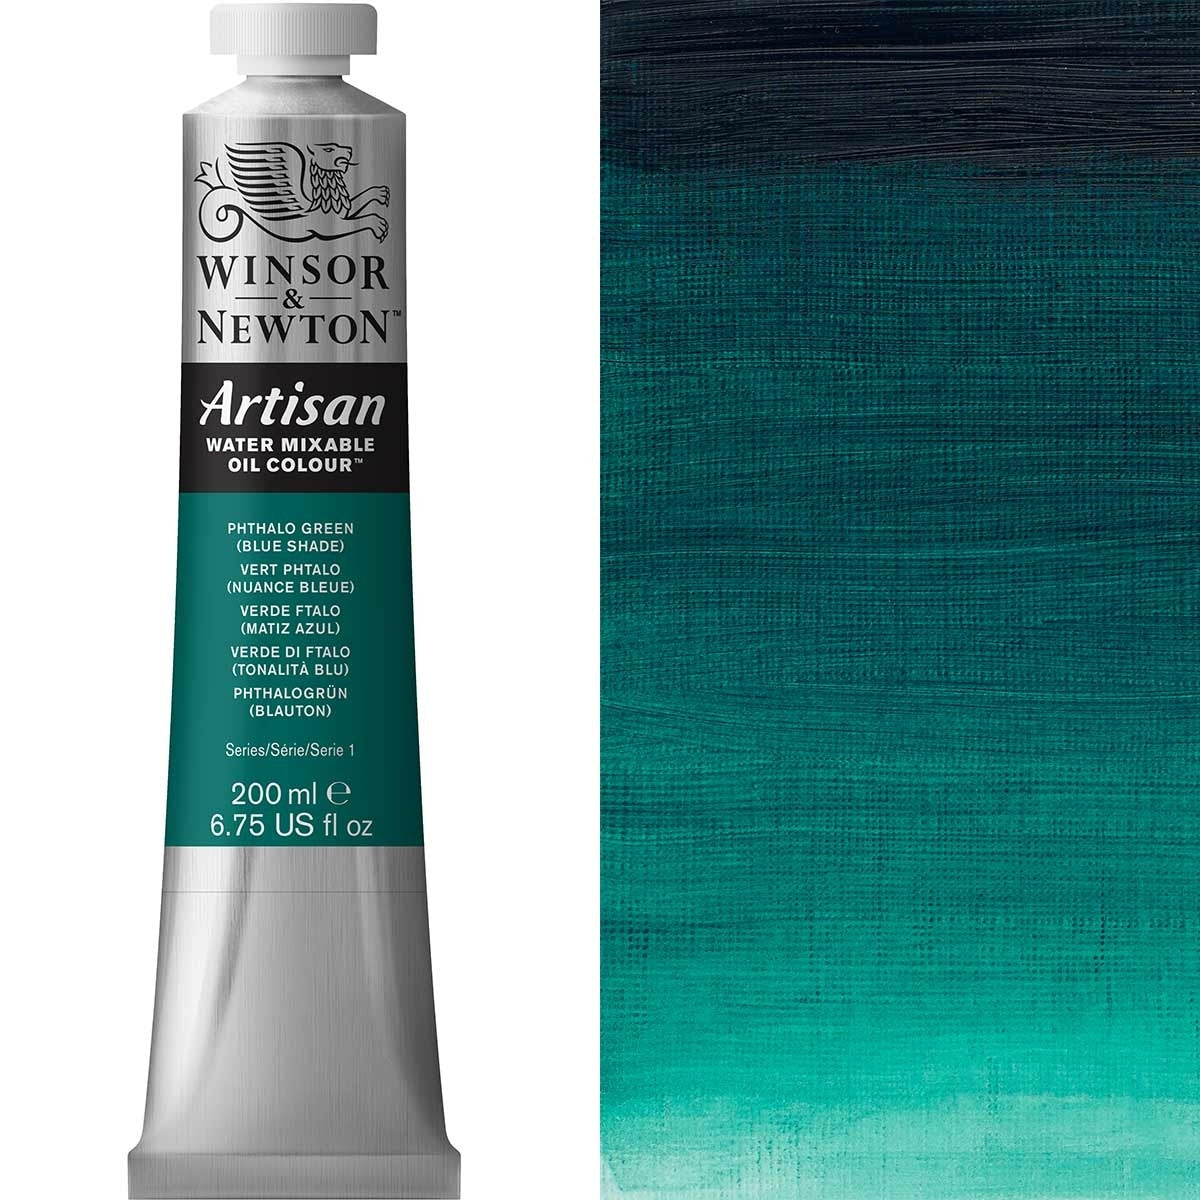 Winsor et Newton - Couleur d'huile artisanale Watermixable - 200 ml - Phthalo Green Blue Shade